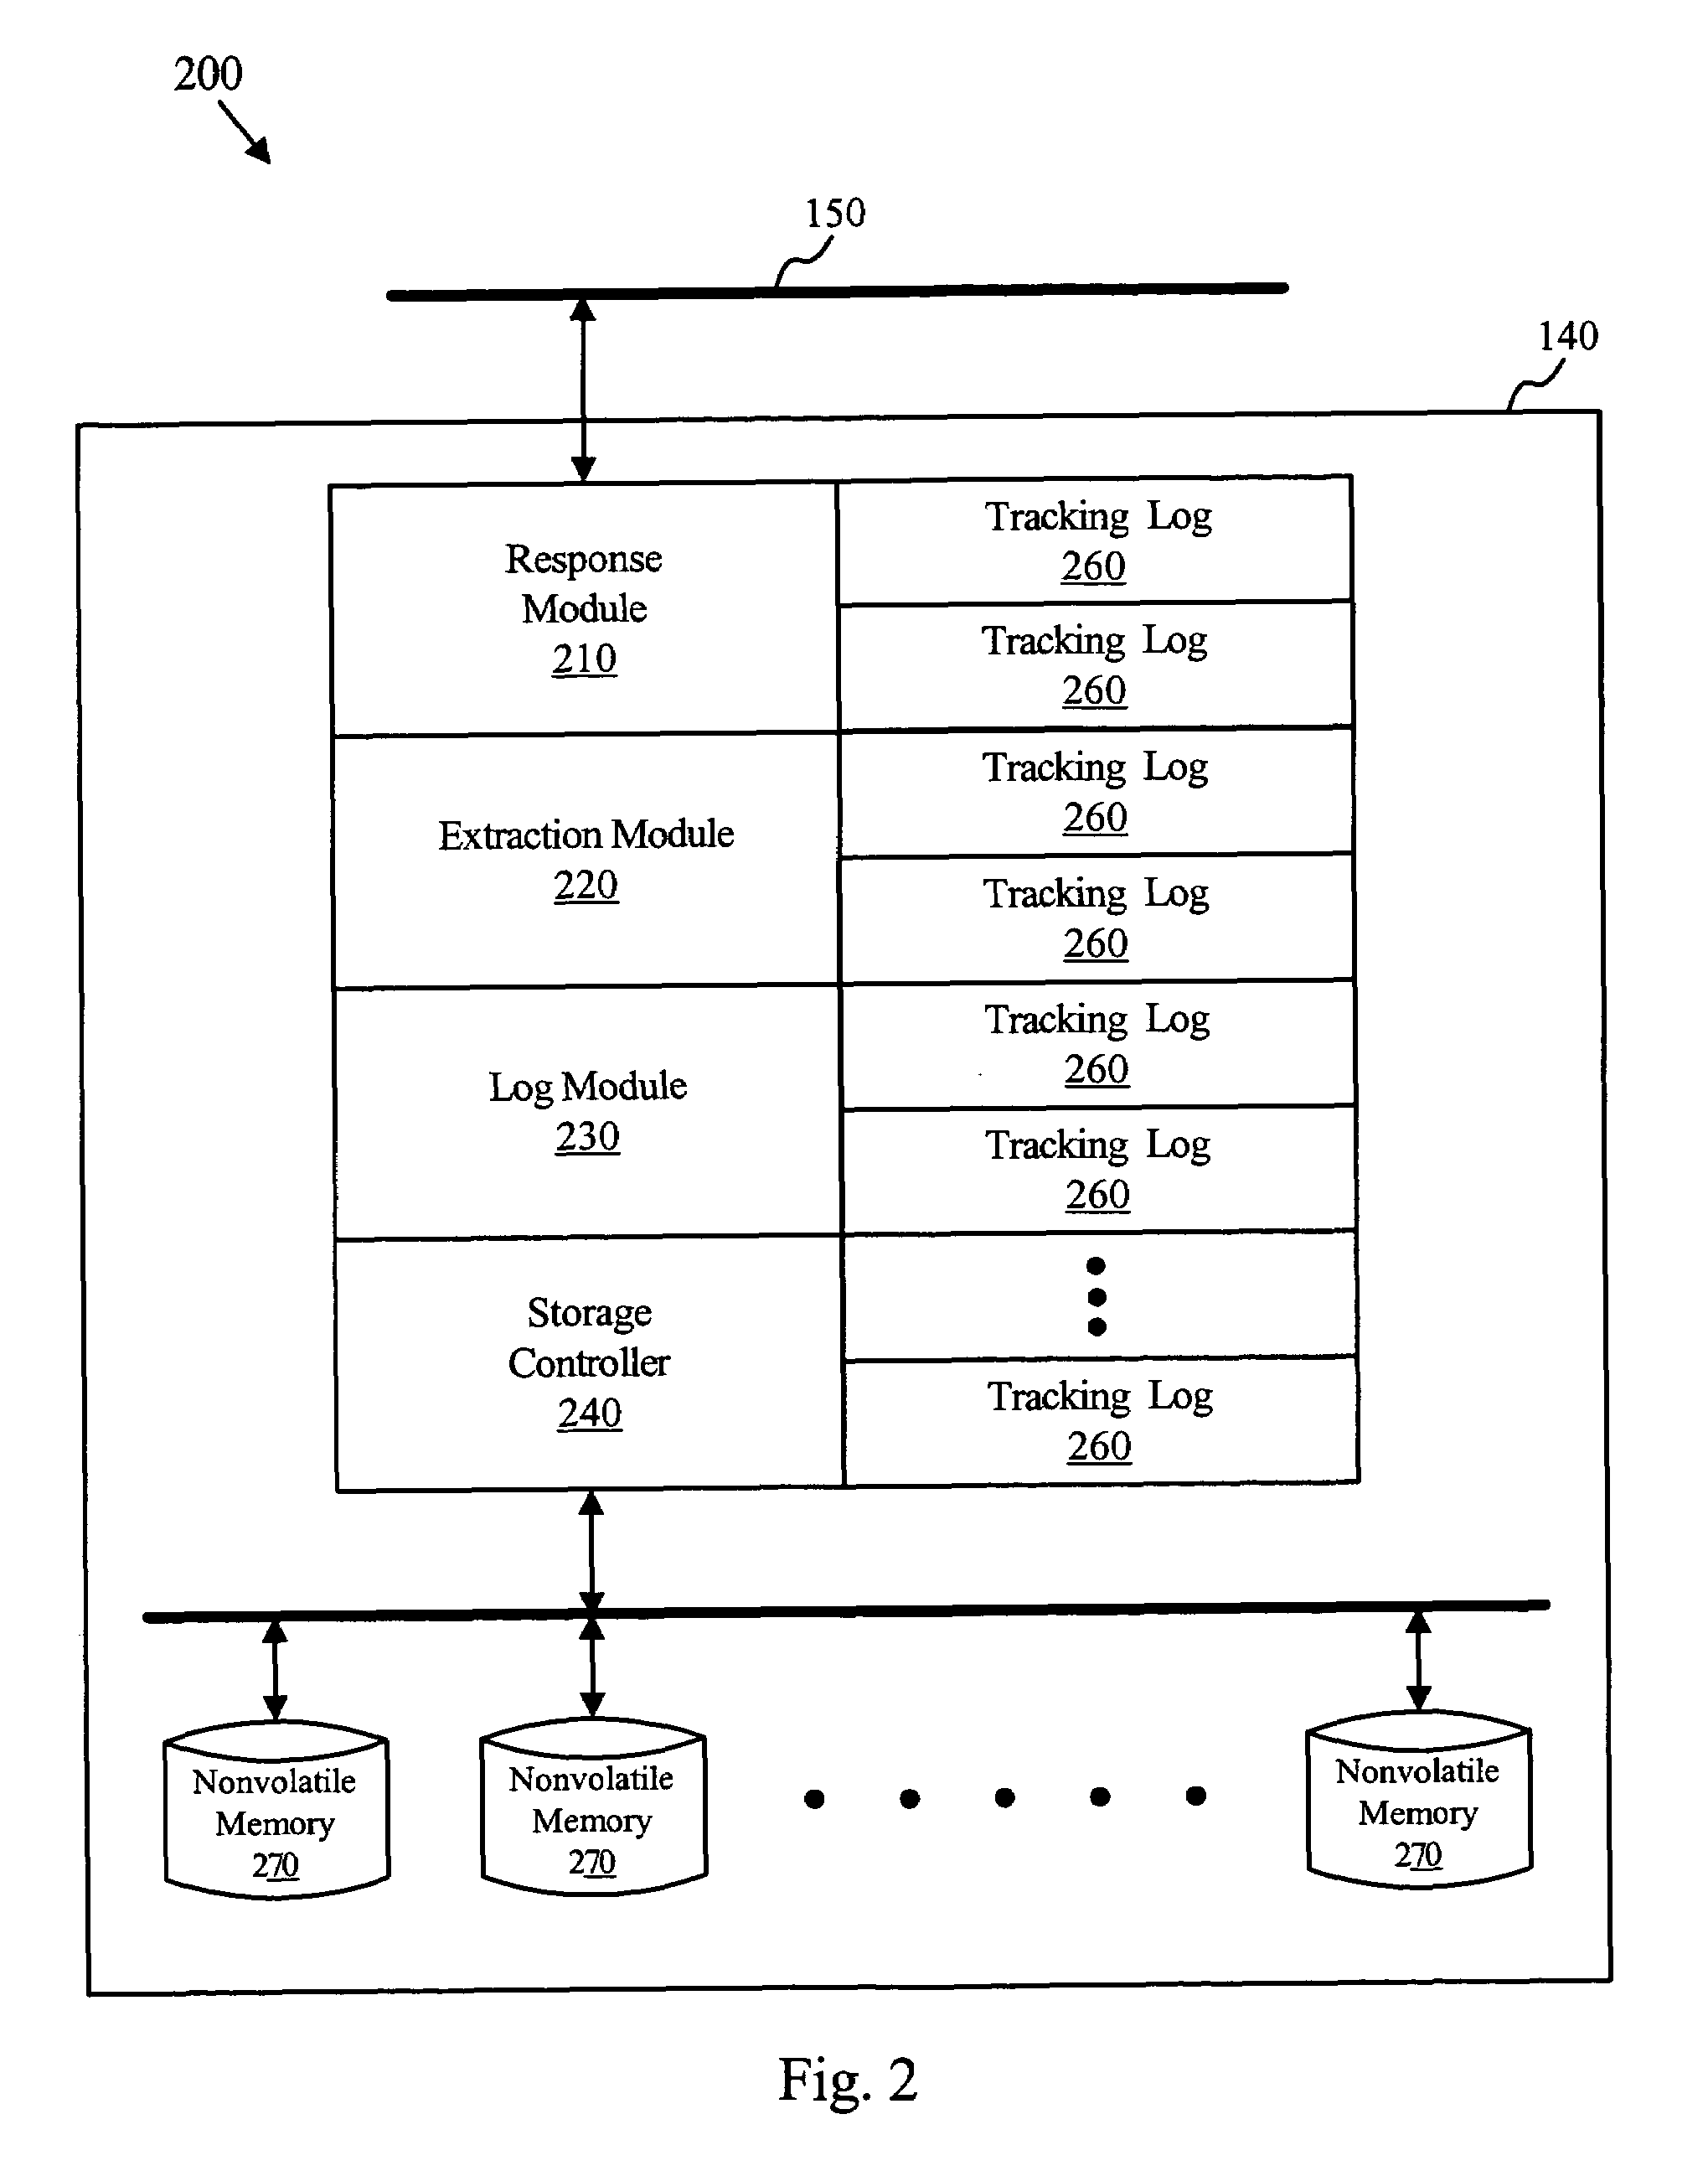 Shared data mirroring apparatus, method, and system